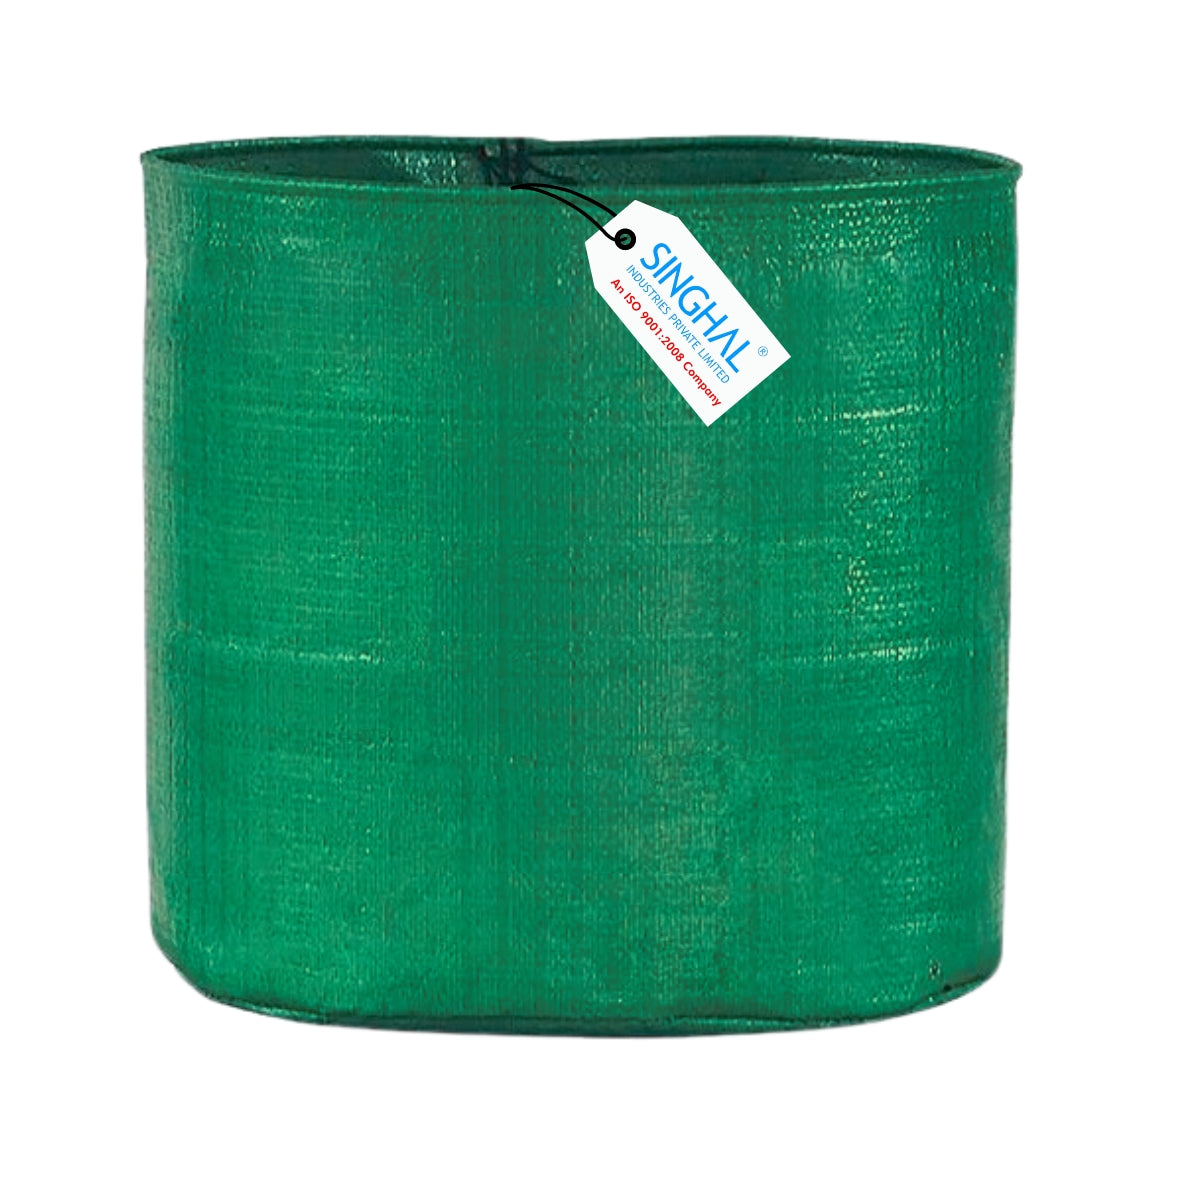 HDPE UV Protected Round Plants Grow Bags 24x24 Inches Pack of 1, Green Color Ideal for Terrace and Vegetable Gardening